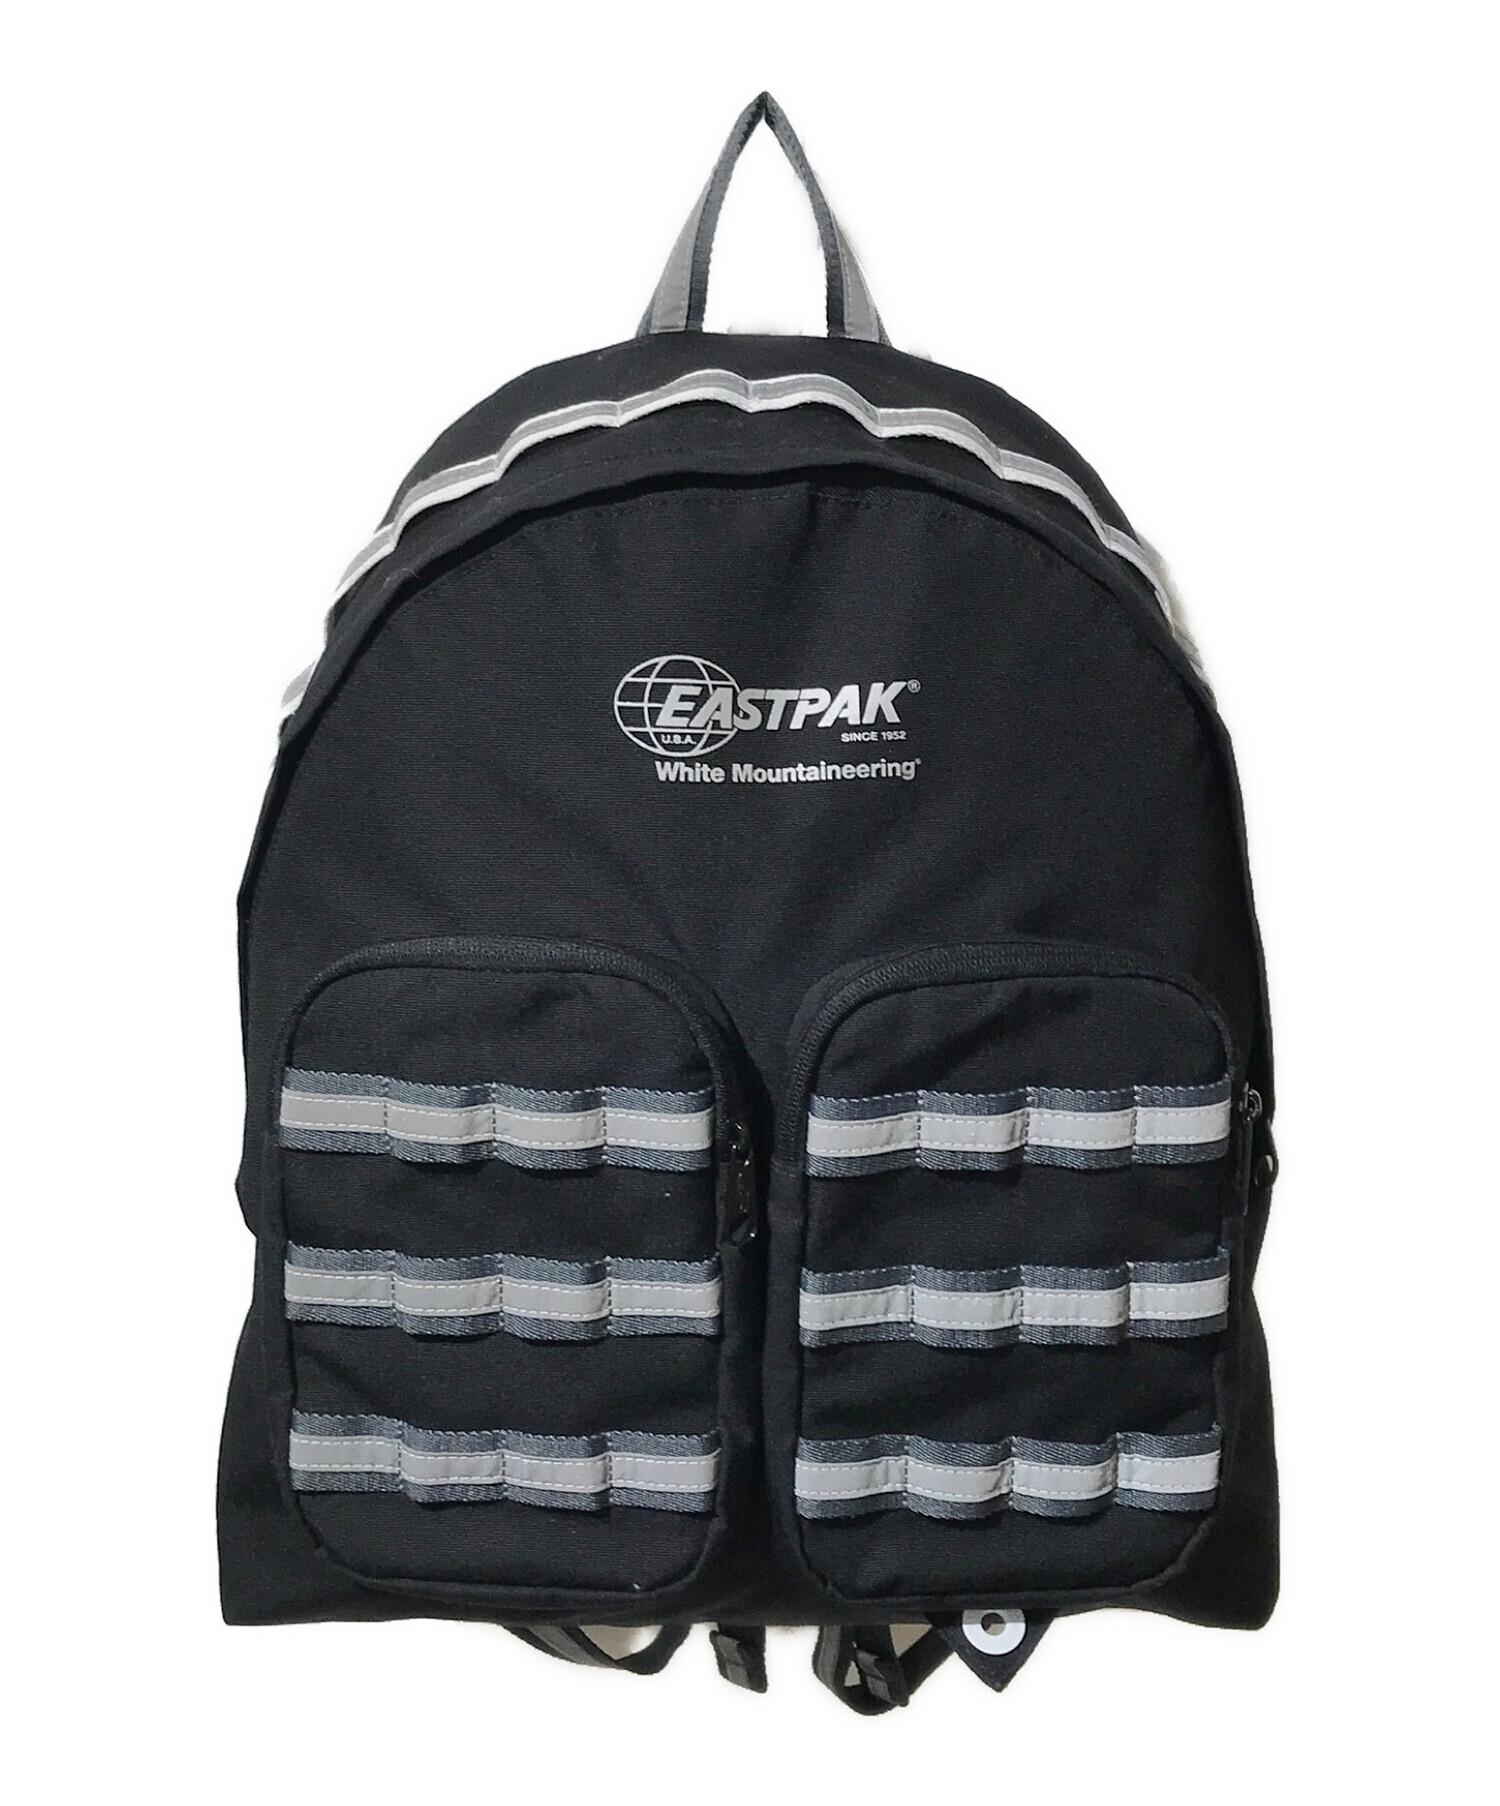 EASTPAK (イーストパック) WHITE MOUNTAINEERING (ホワイトマウンテ二アニング) DOUBL'R BACKPACK